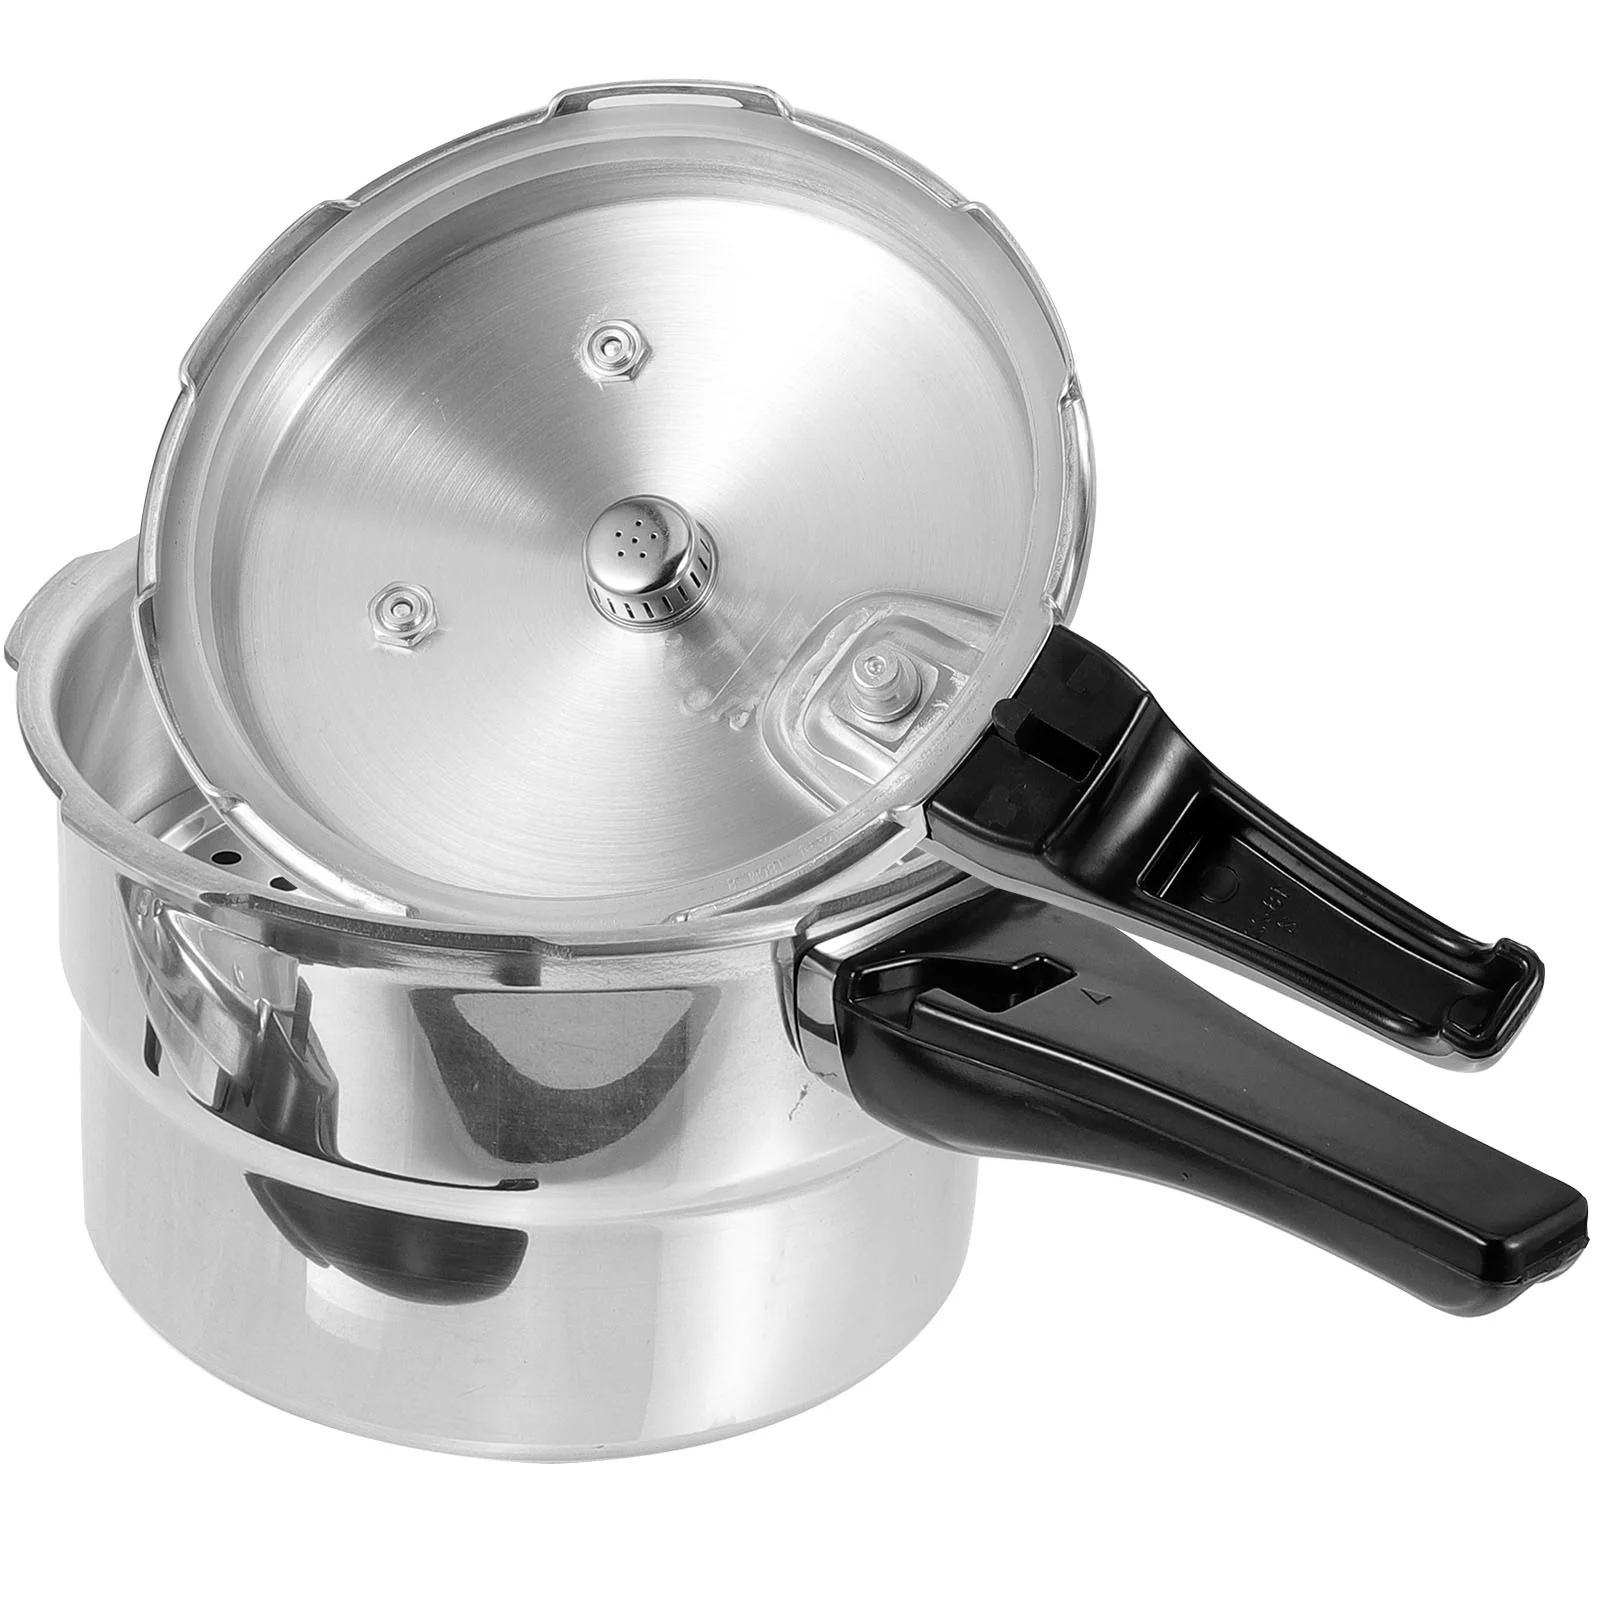 

Stainless Steel Pressure Cooker Veggie Steamer Pot Tall Vegetable Induction Cookers Aluminum Alloy Kitchen Stove Top Canning